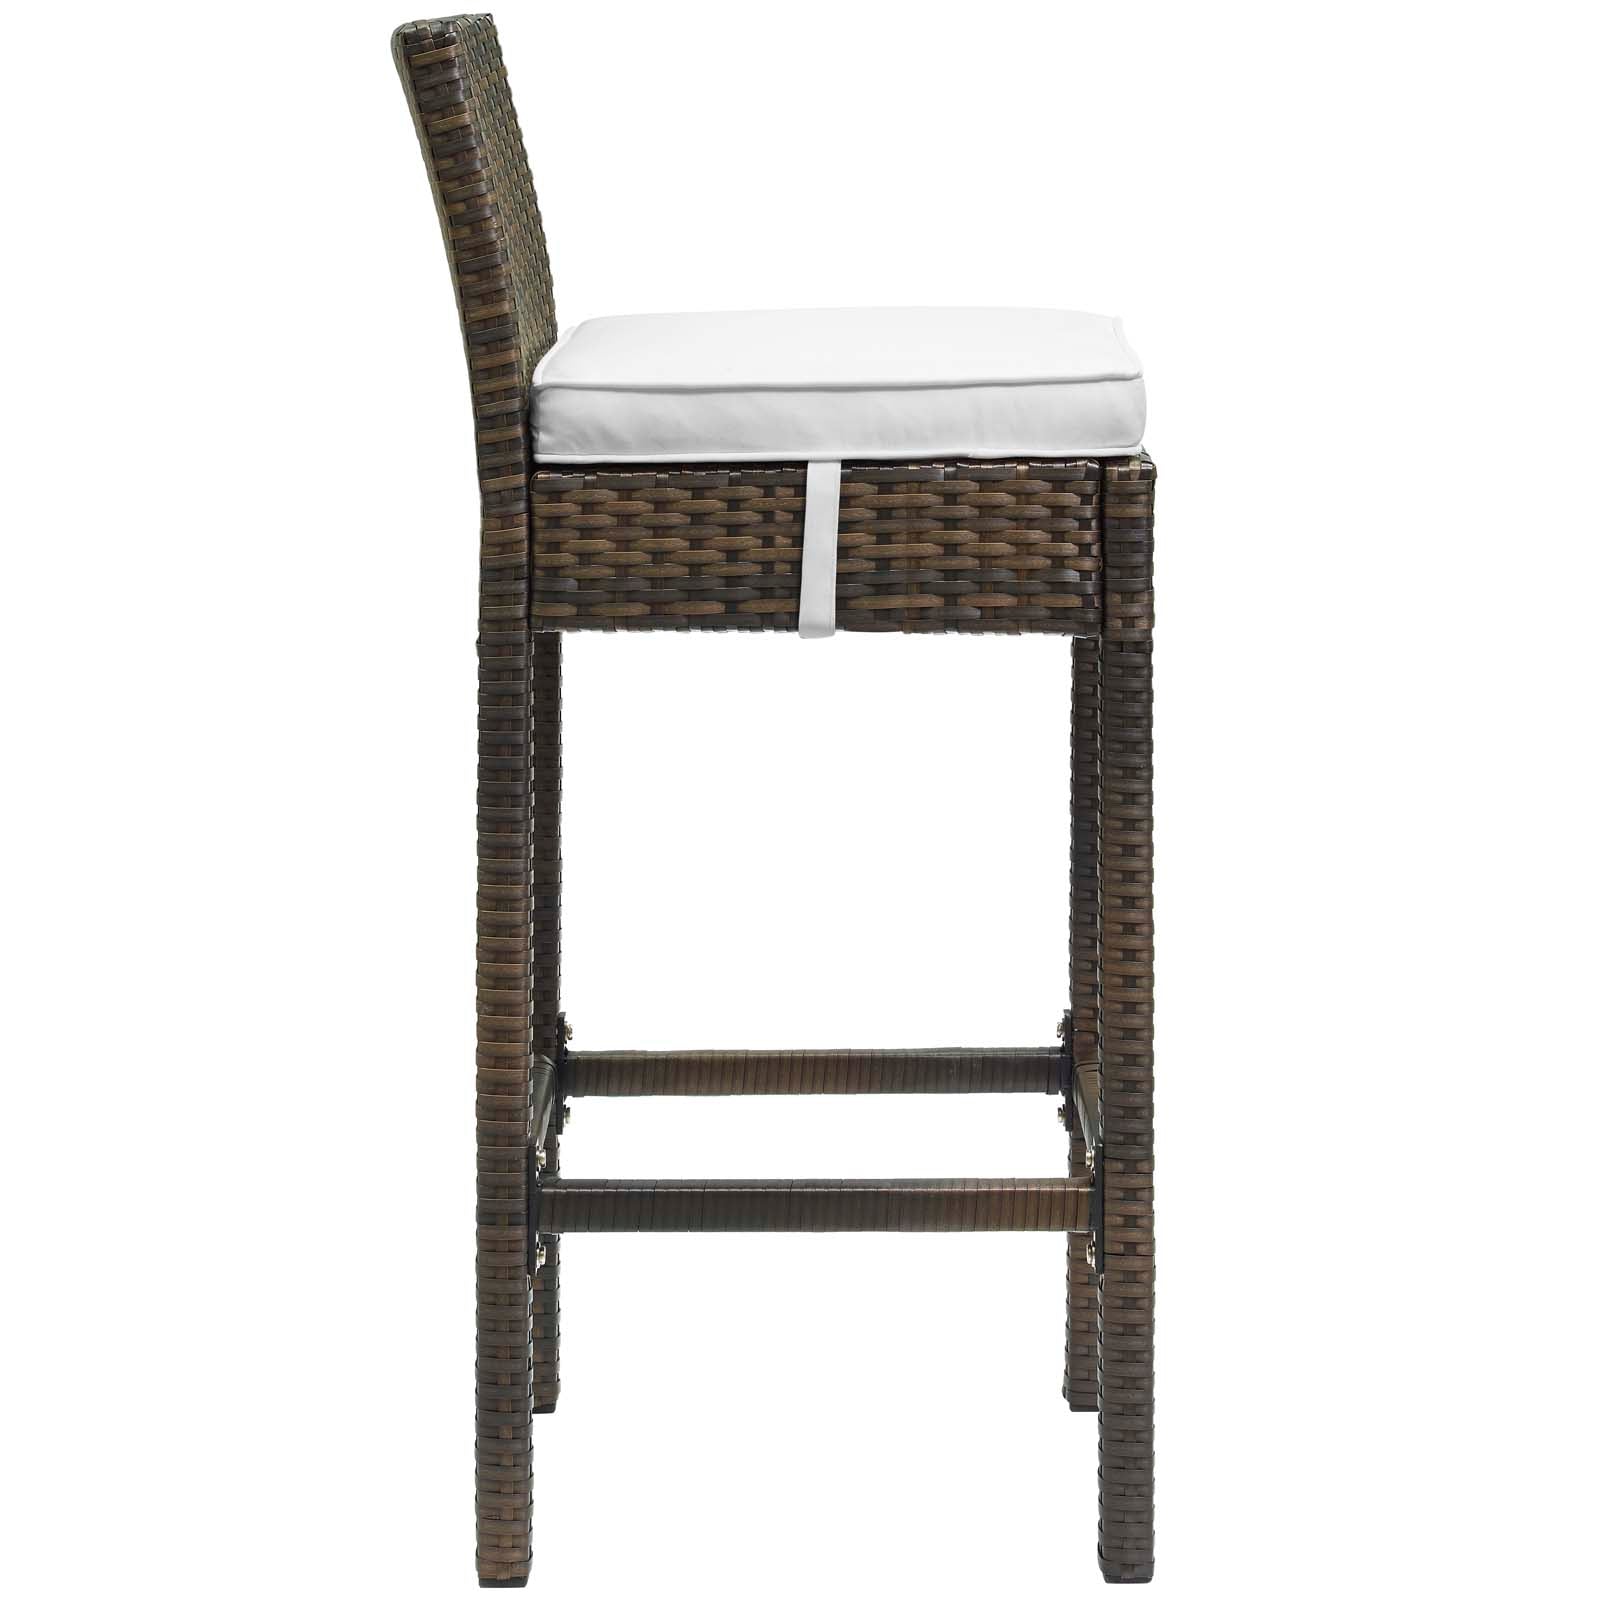 Modway Outdoor Barstools - Conduit Bar Stool Outdoor Patio Wicker Rattan Set of 2 Brown White